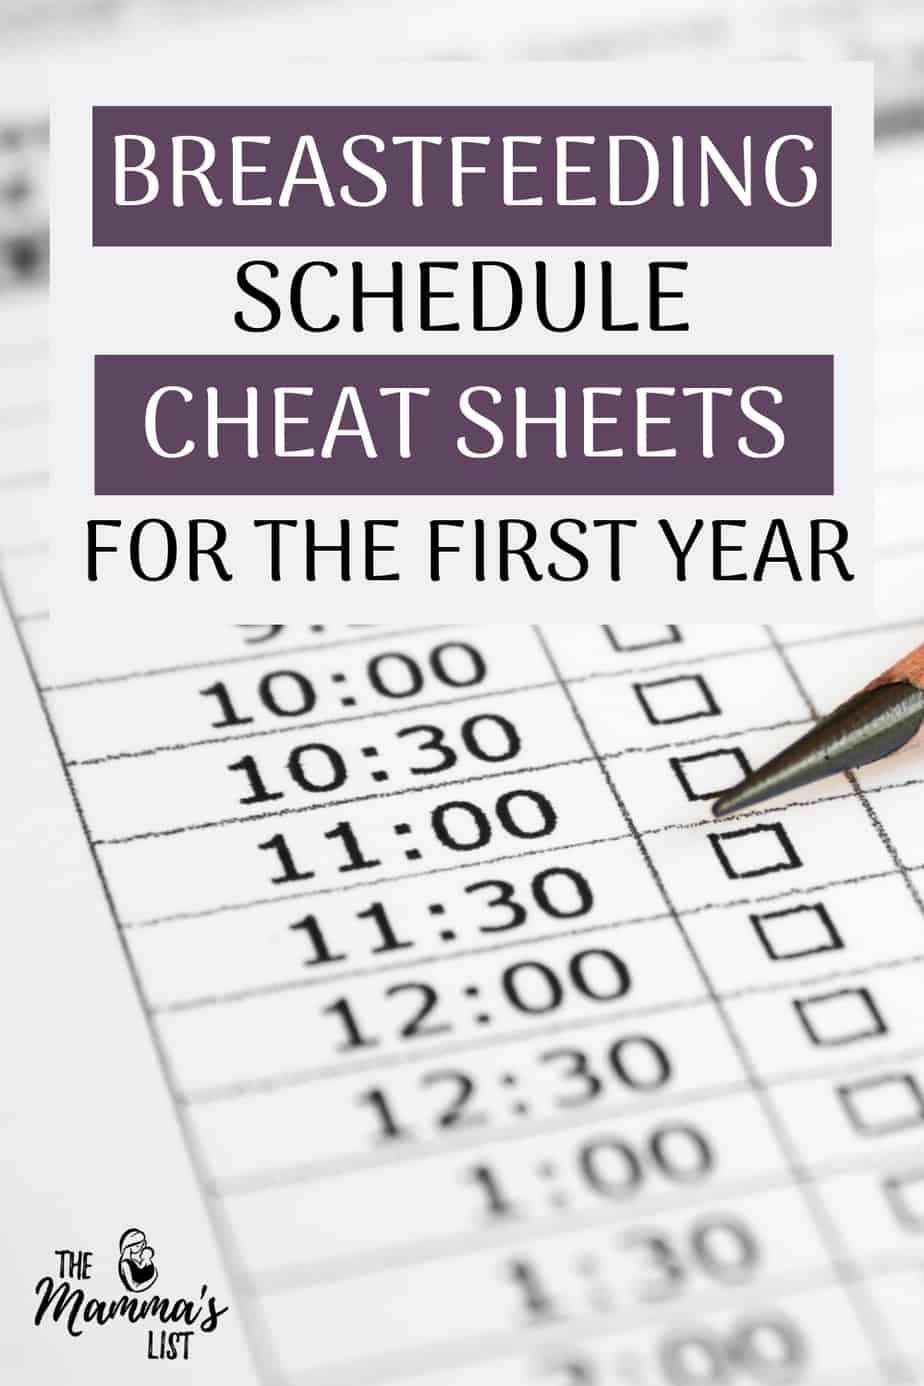 Breastfeeding the first year is hard. It's impossible to know if you're getting it right. Check out these breastfeeding schedule cheat sheets to figure out what your baby's feeding schedule should look like throughout the first year.